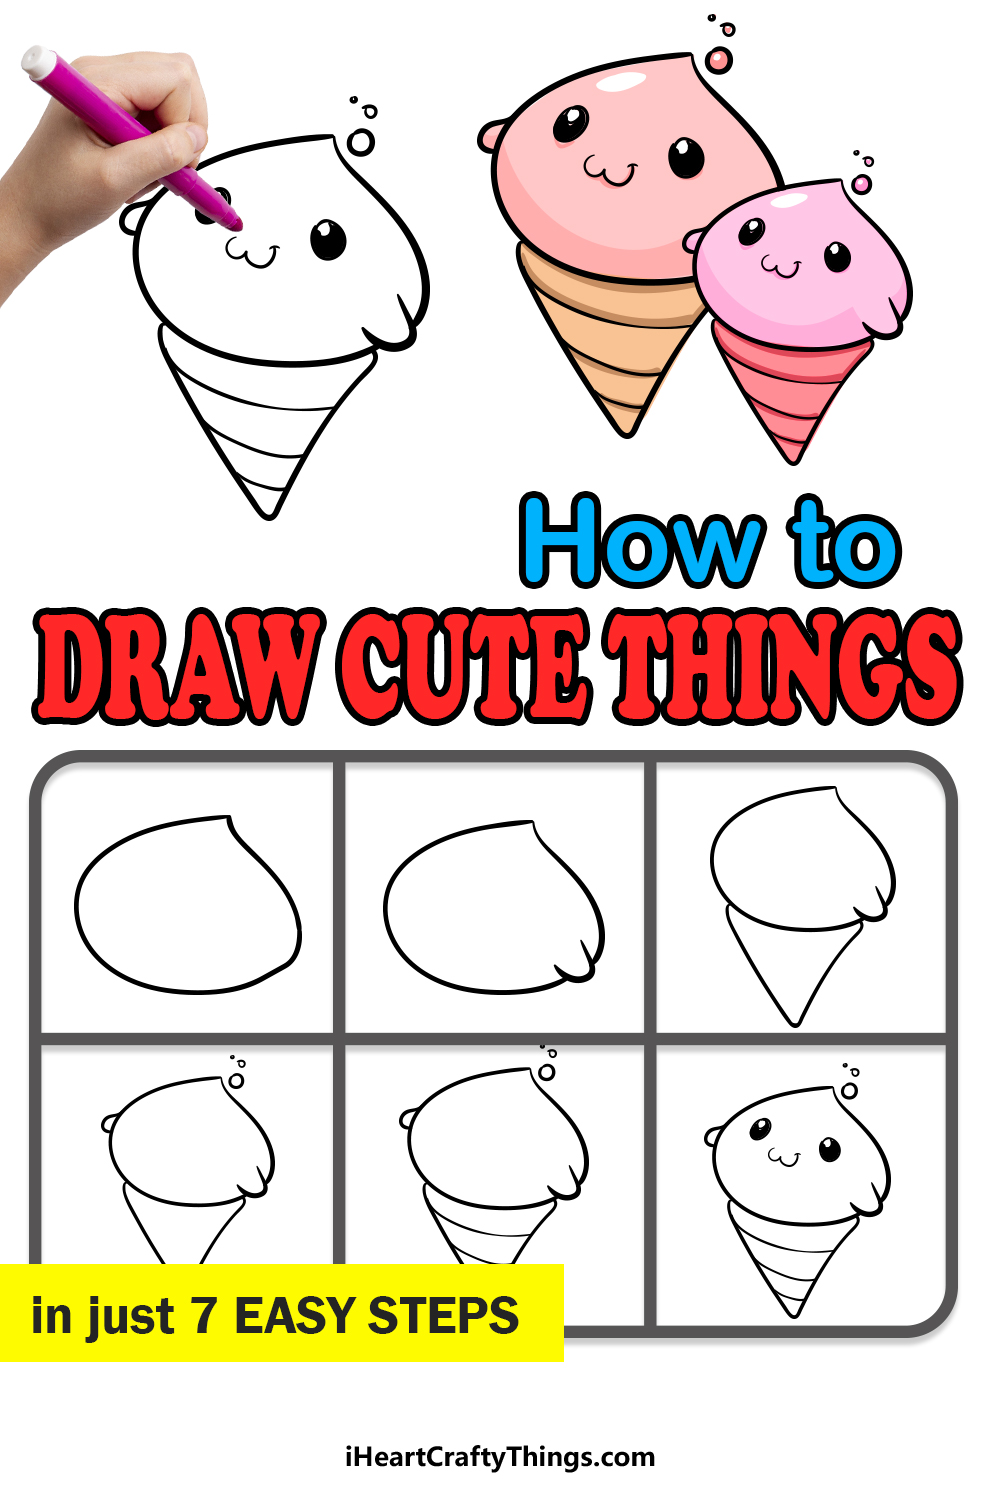 how to draw cute things in 7 easy steps